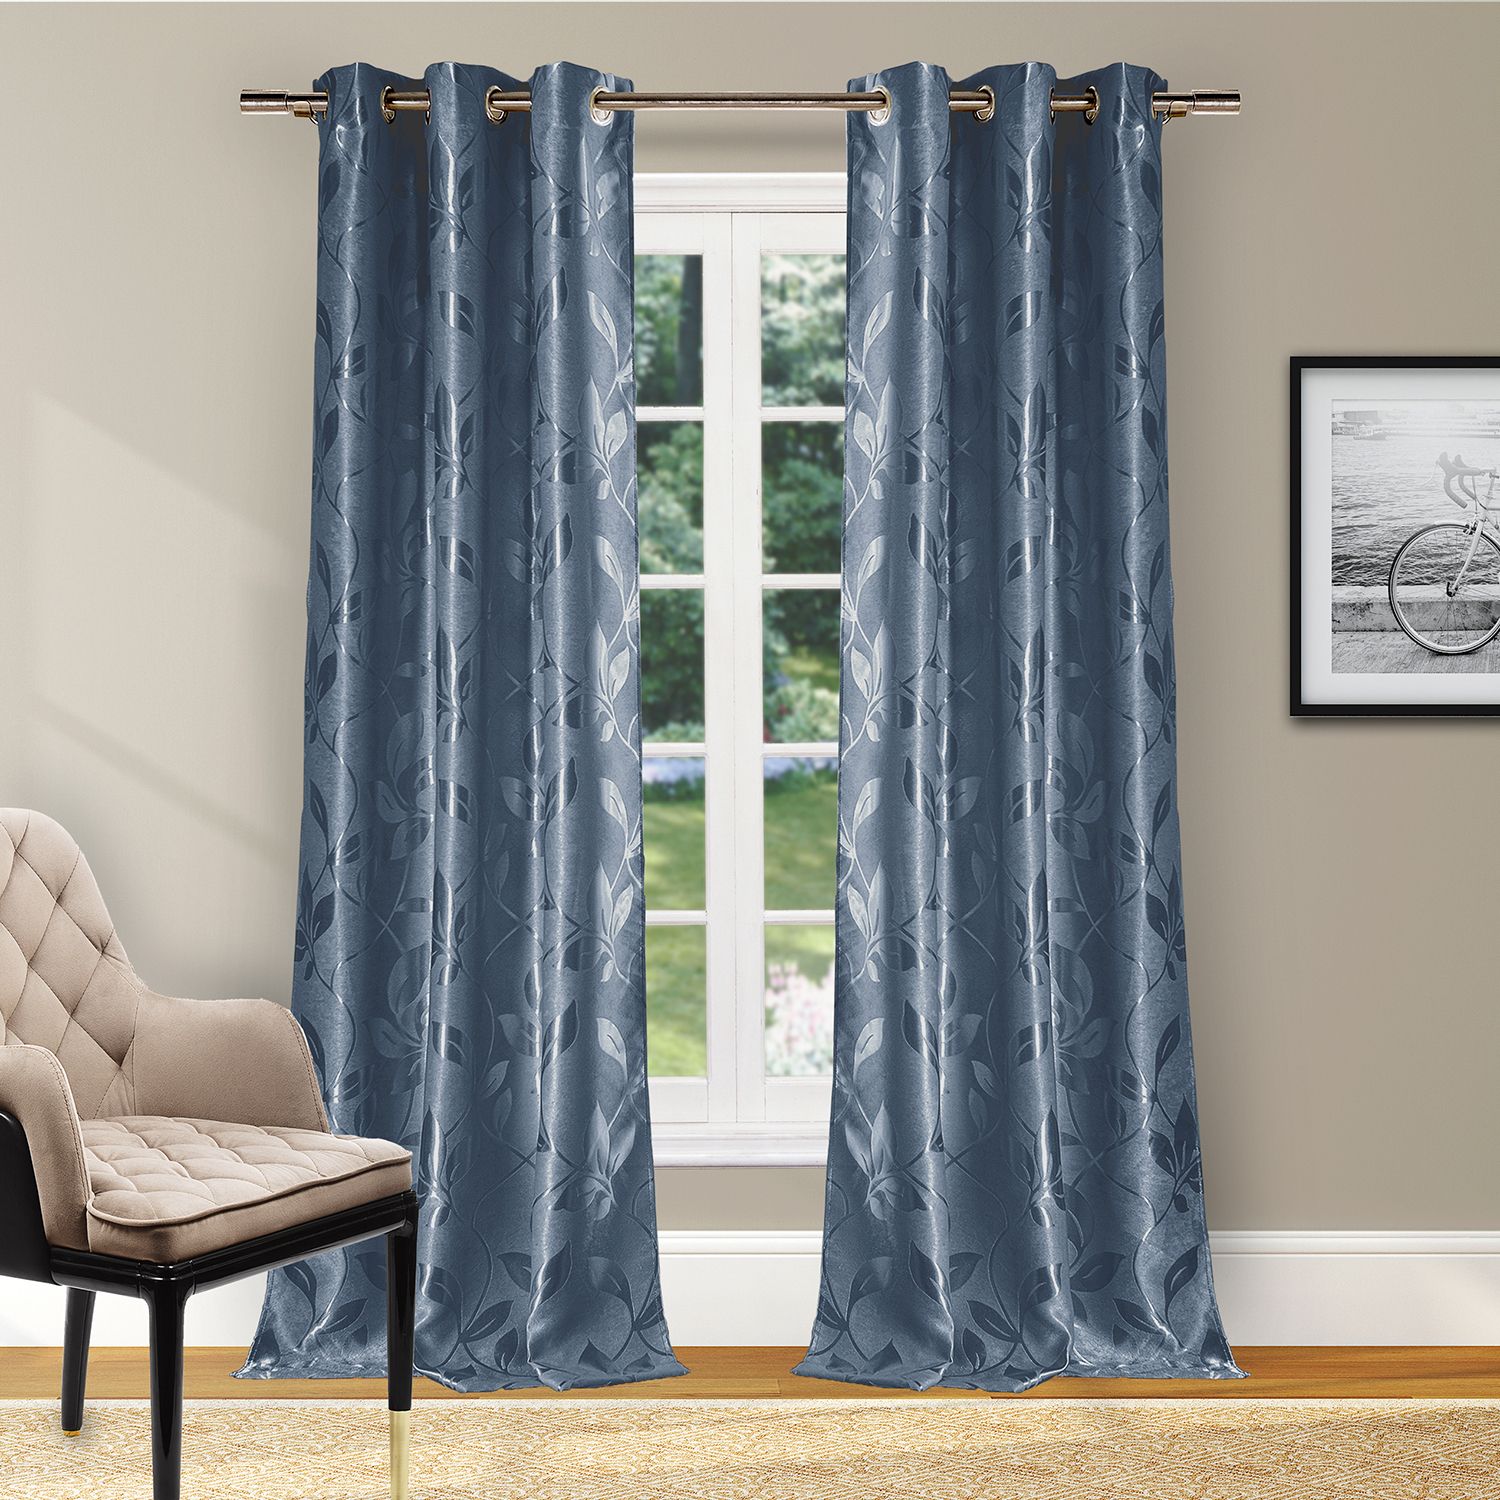 Image for Duck River Textile Blair Printed Blackout Window Curtain Set at Kohl's.